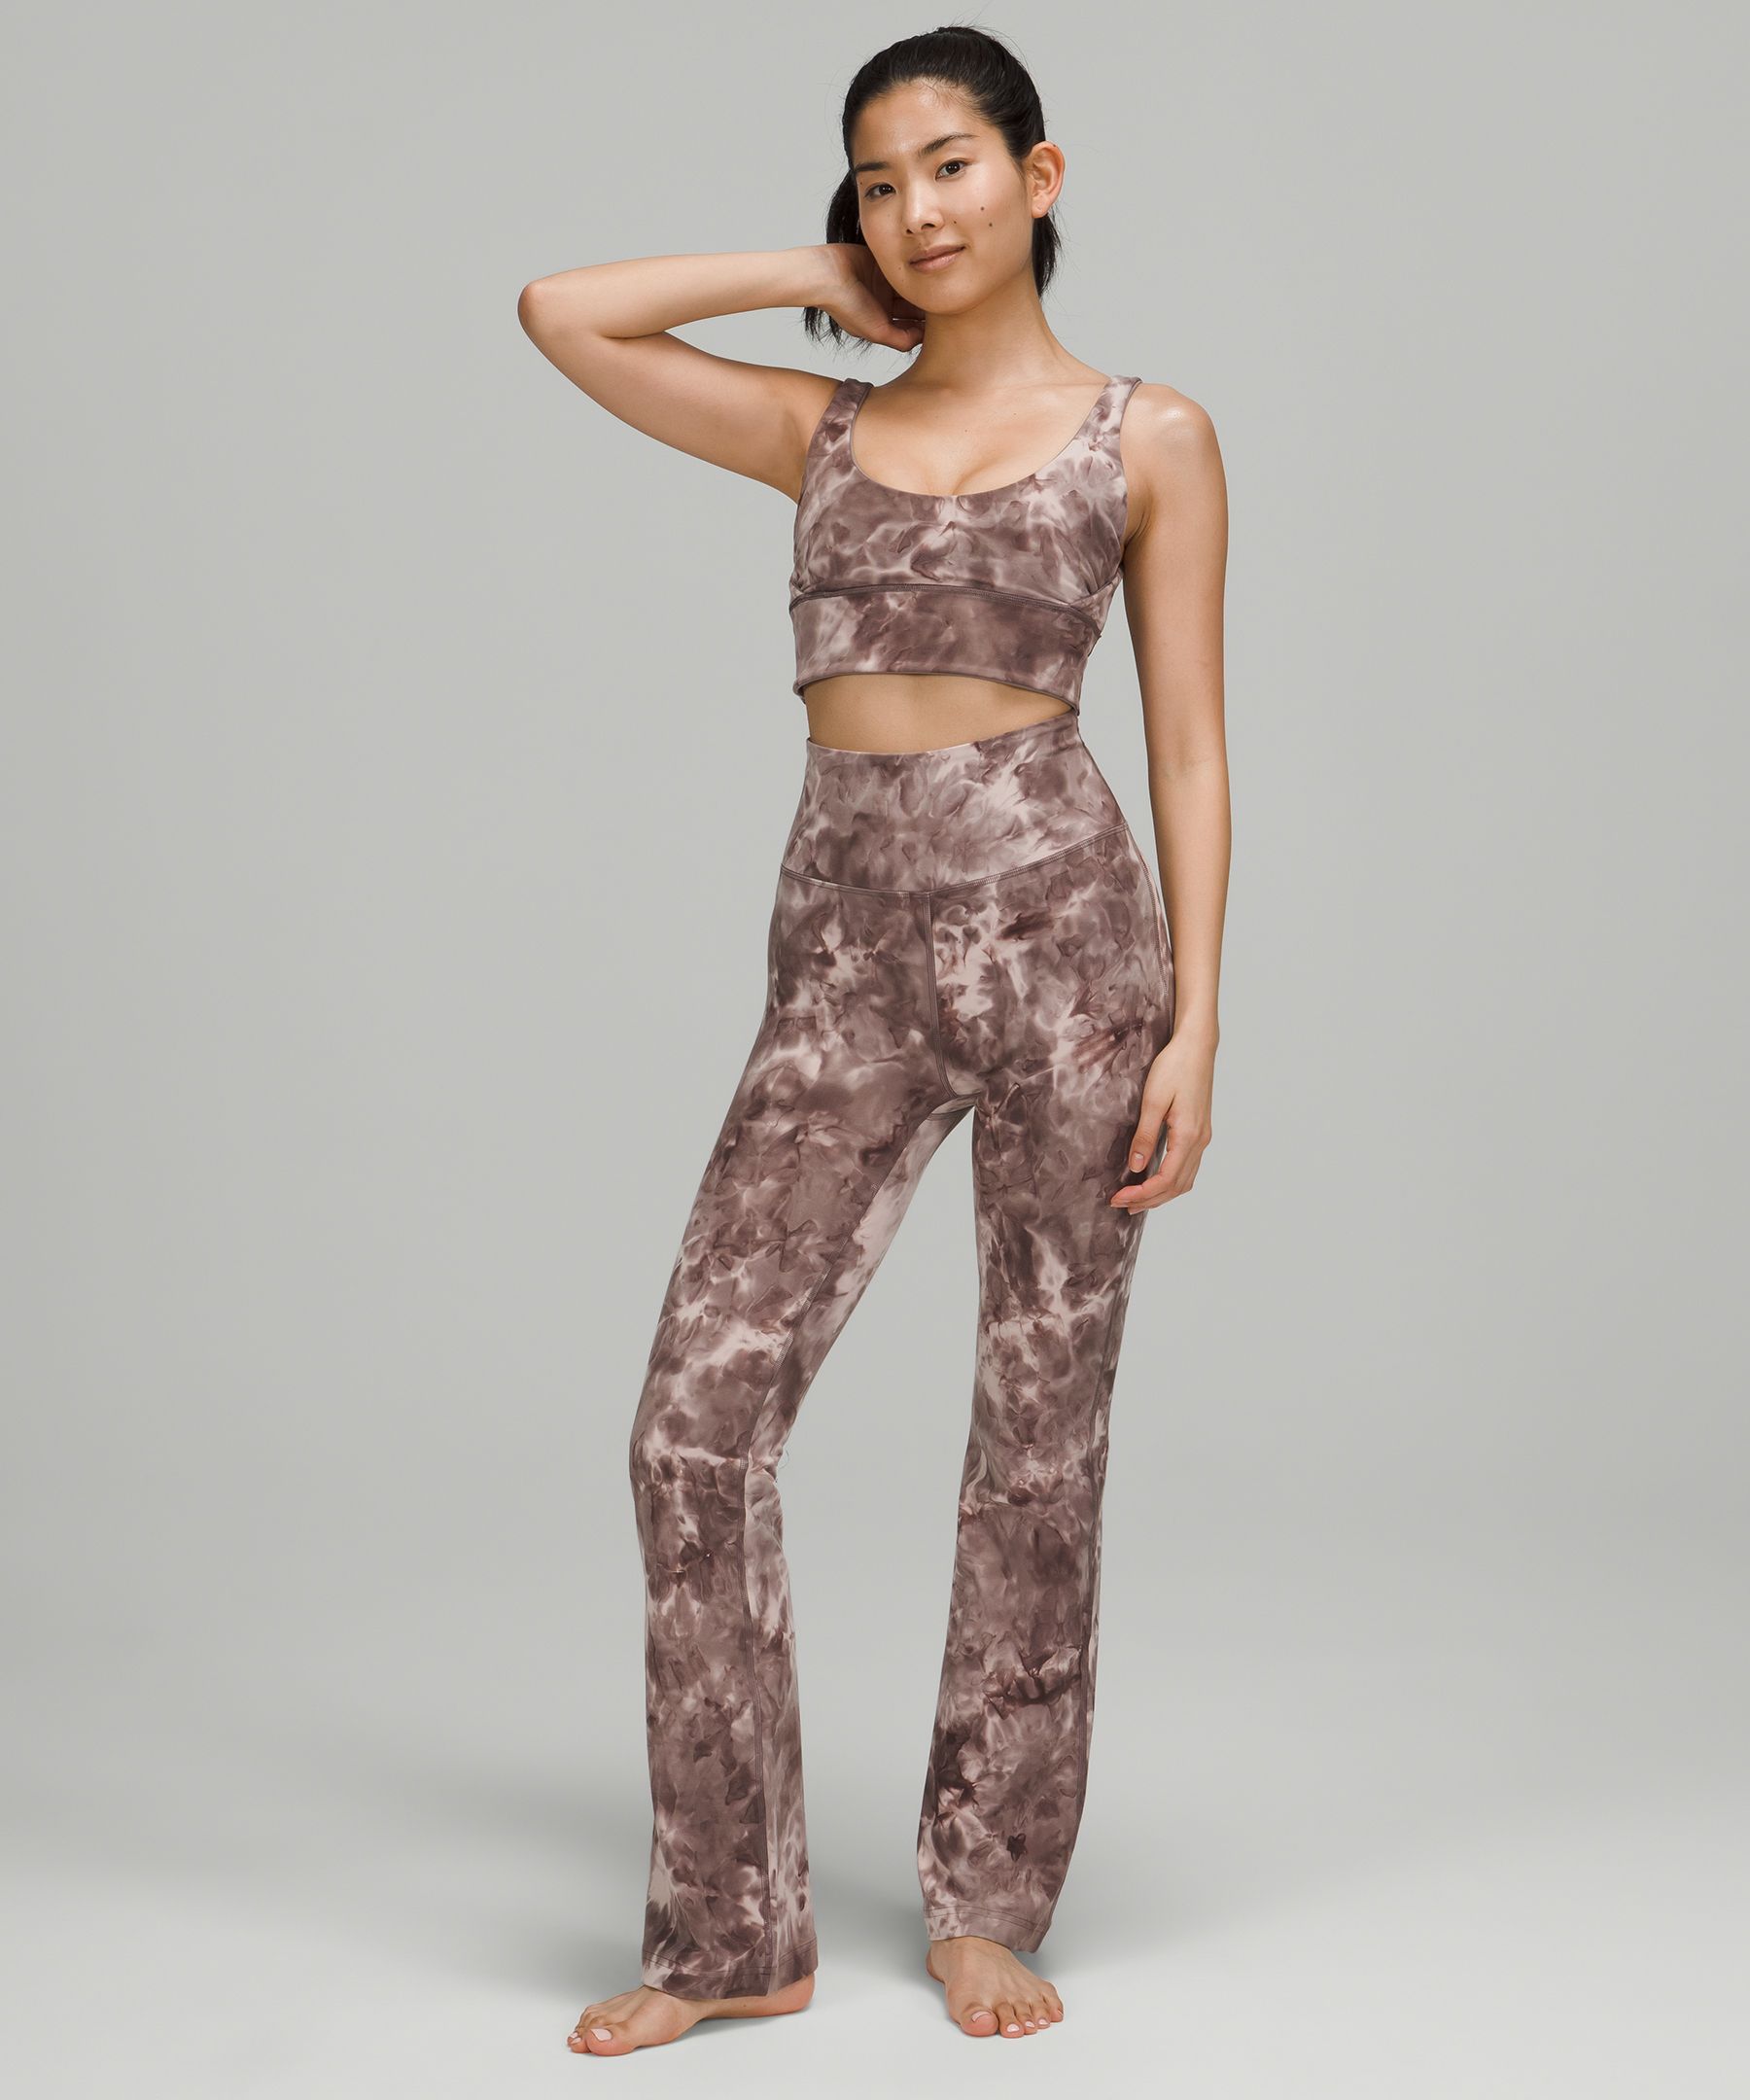 Let's Groove Glitter Crop Top and Pants Set